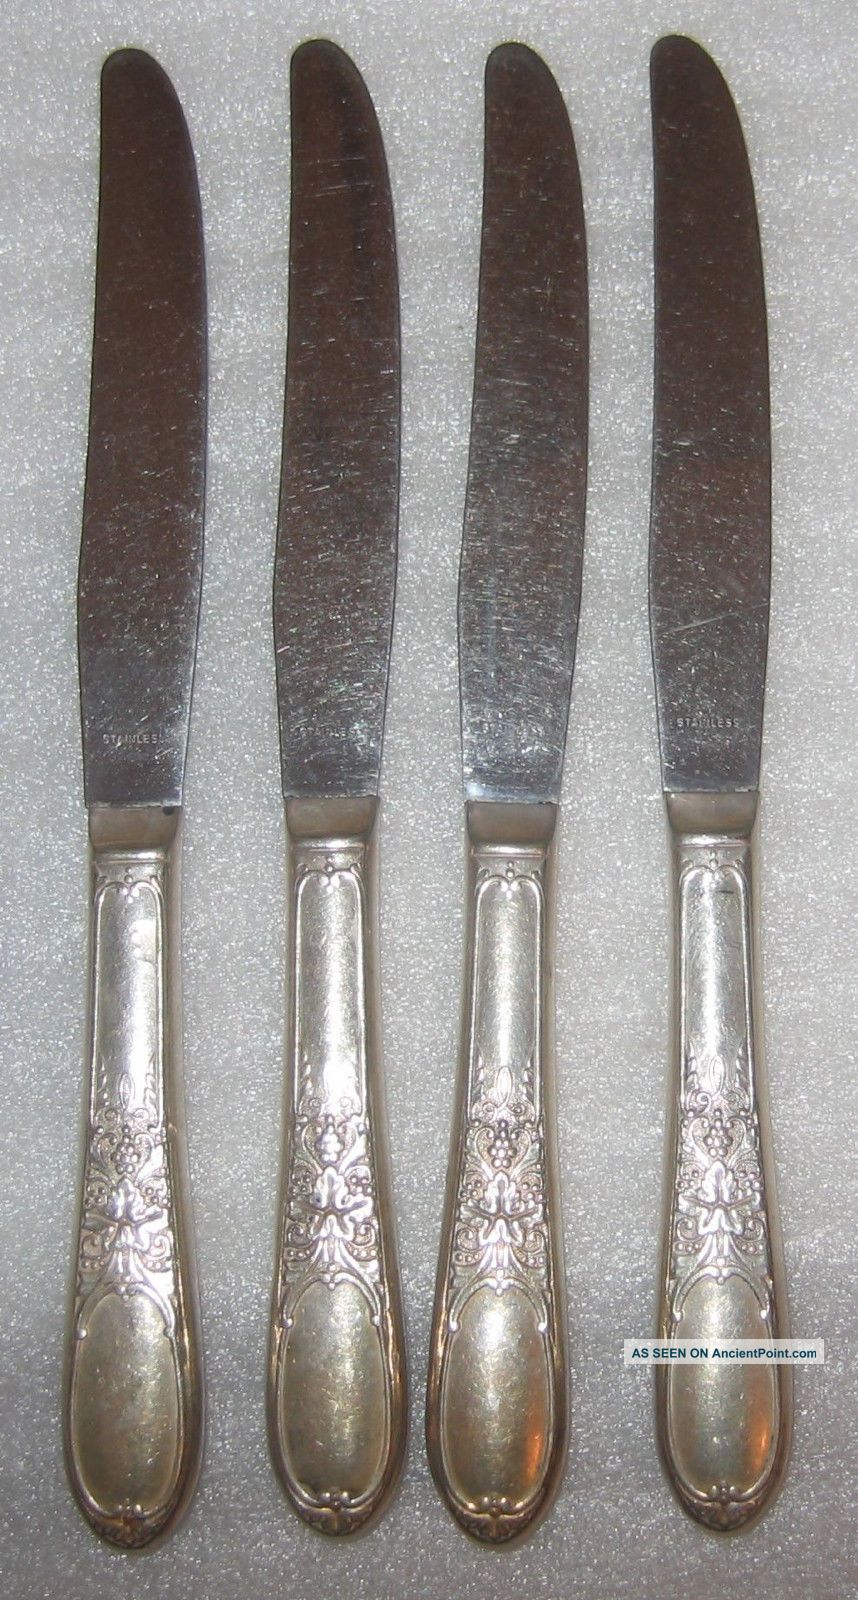 Champaigne Burgundy 1934 4 Dinner Knives Wm Rogers Is Silverplate 9 